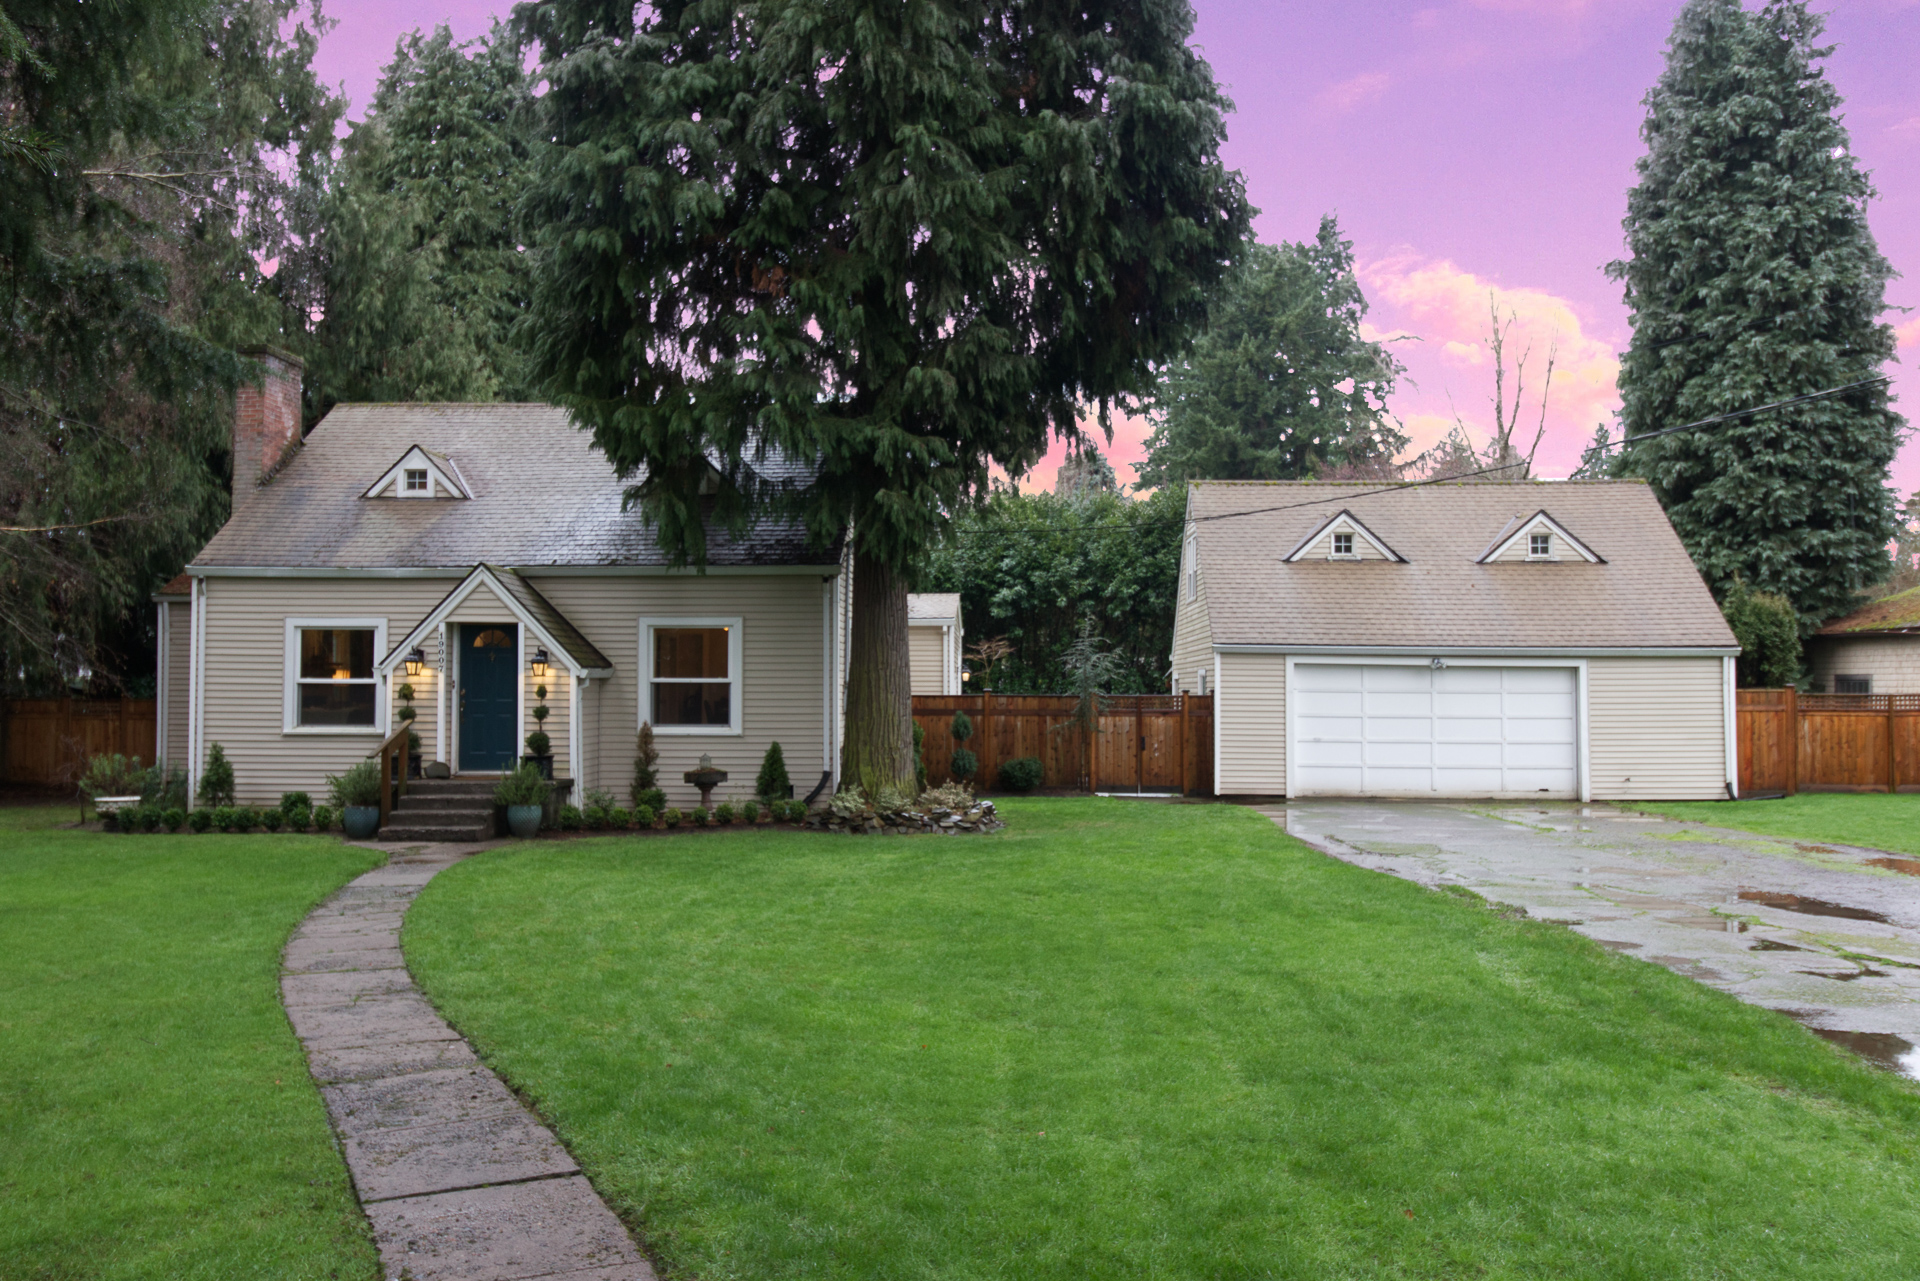 SOLD for $474,000! Multiple offers! 19007 SE River Rd., Milwaukie.